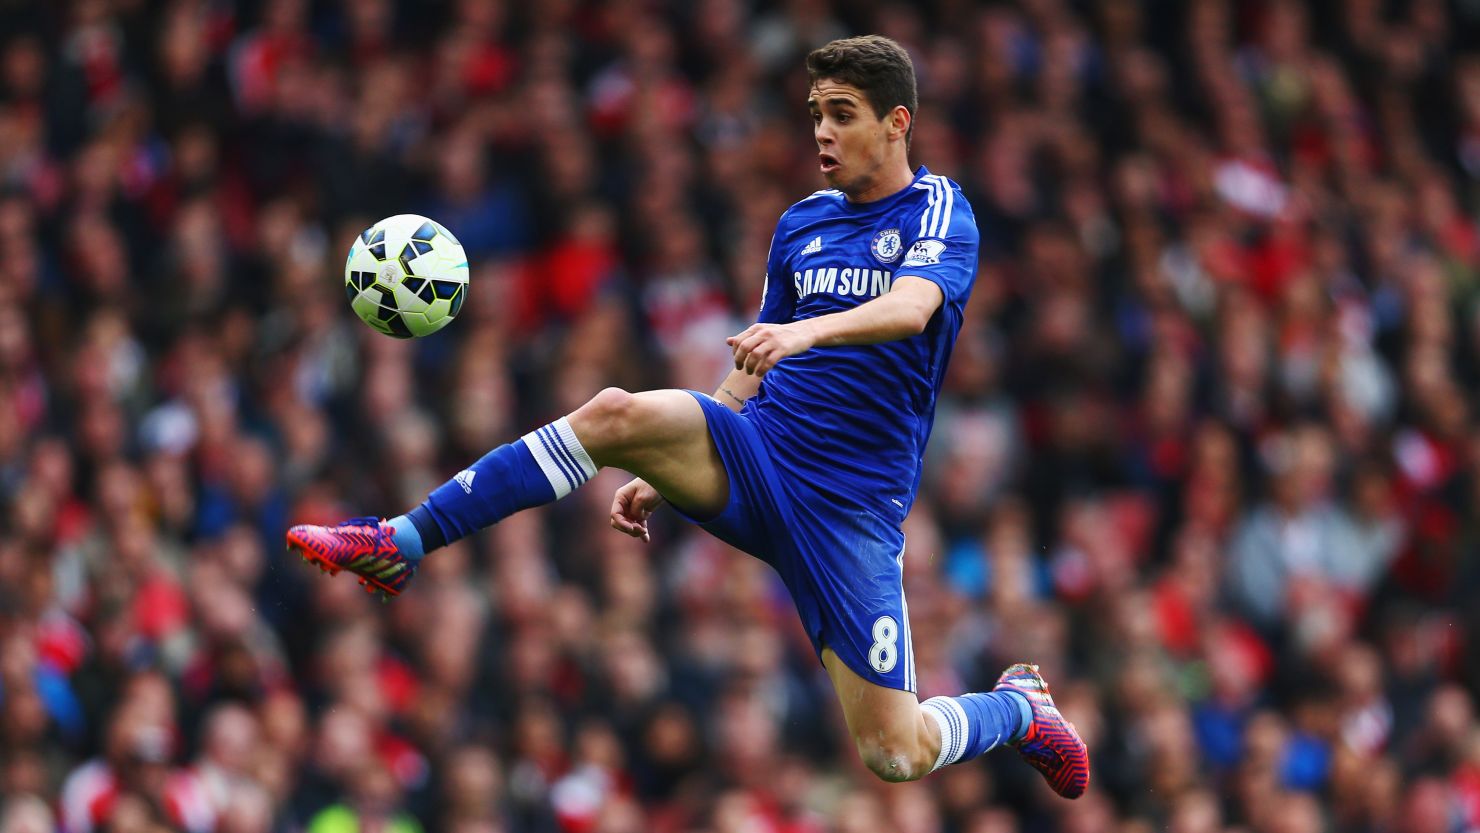 Oscar controls the ball during Chelsea's Premier League match against Arsenal on April 26, 2015.